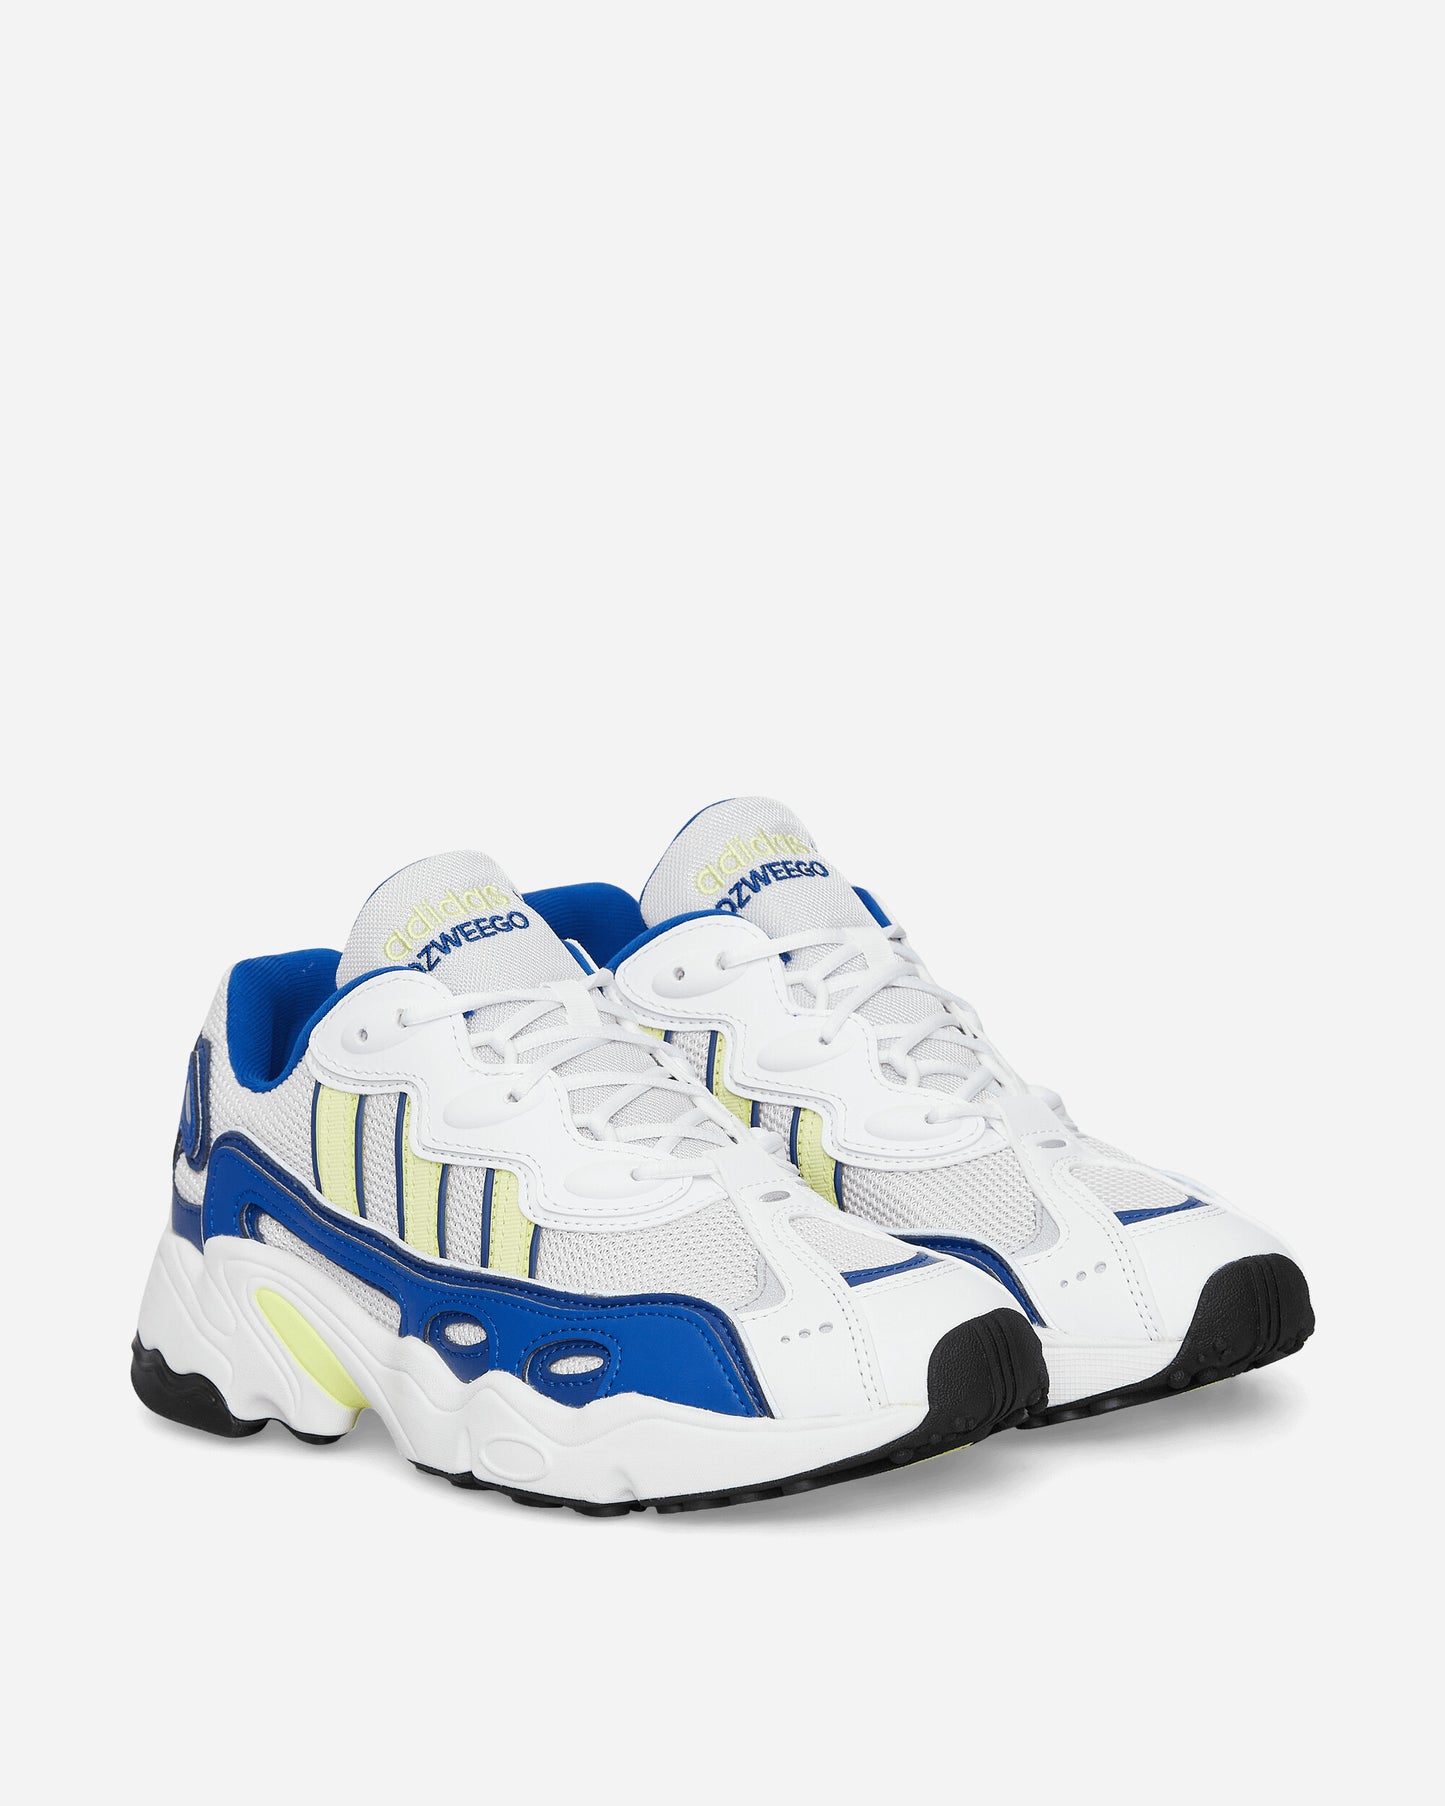 adidas Wmns Ozweego Og W White/Yellow Sneakers Low IE6998 001